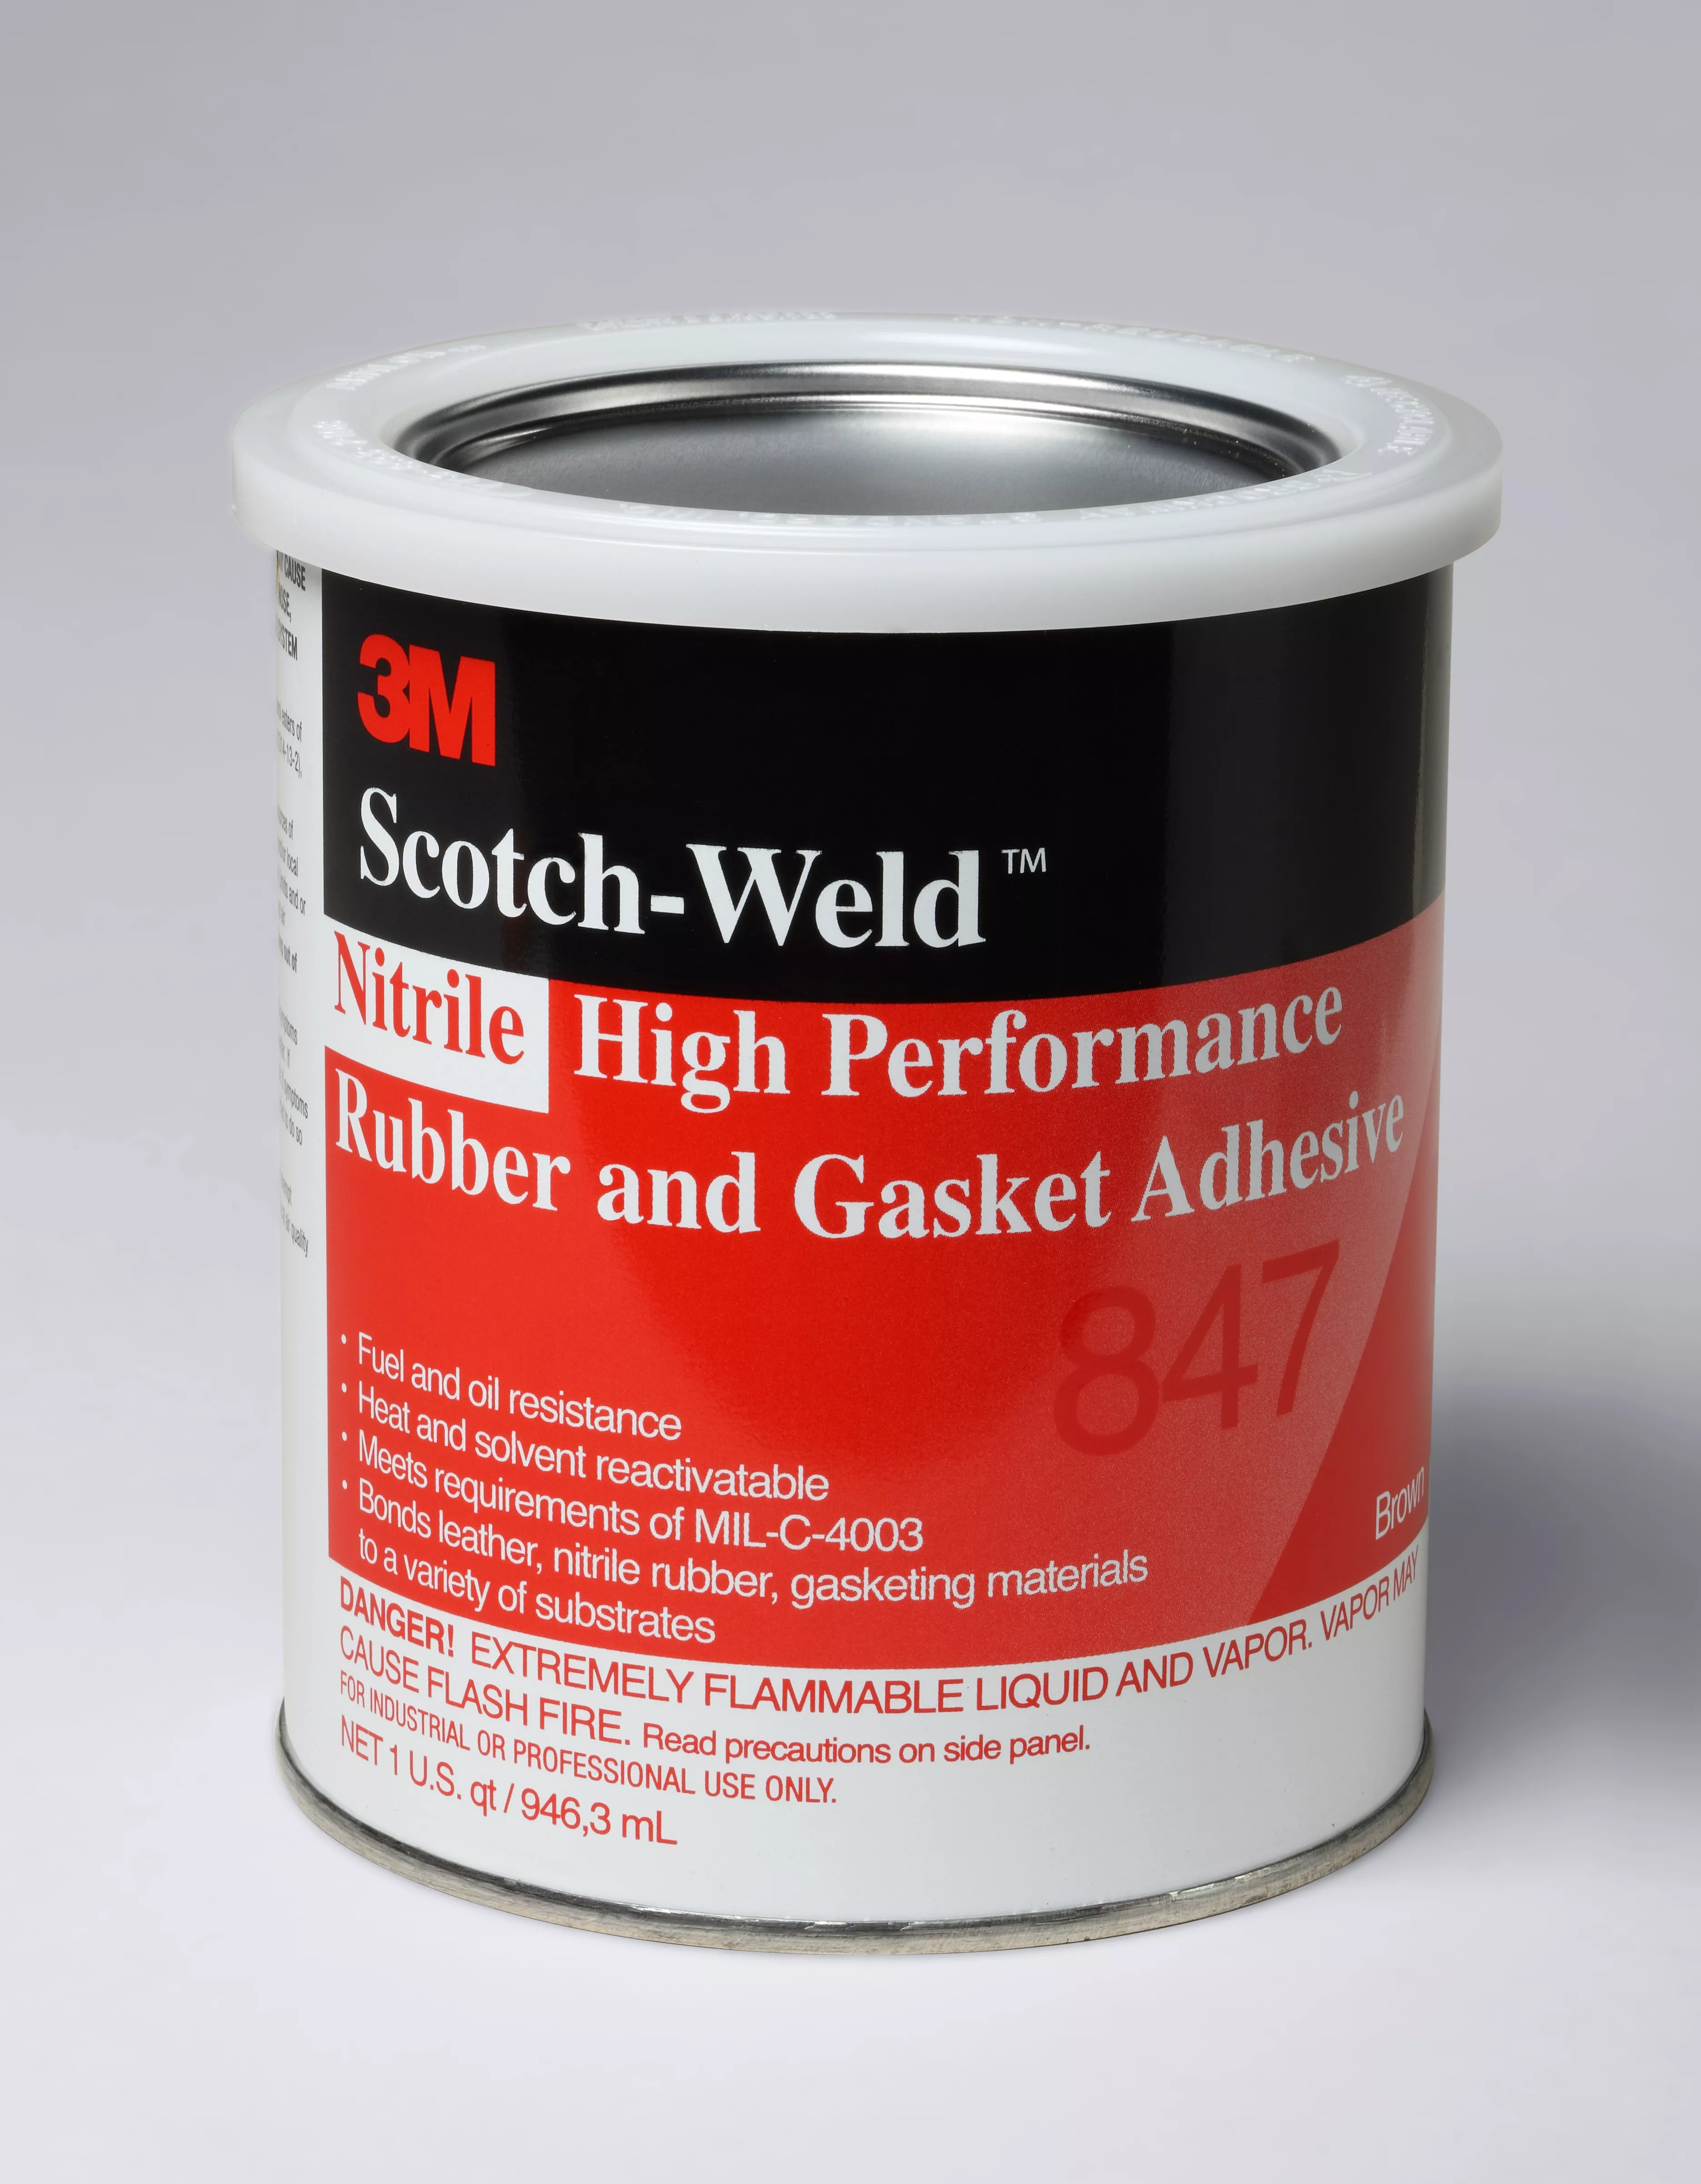 3M™ Nitrile High Performance Rubber and Gasket Adhesive 847, Brown, 1
Quart, 12 Can/Case